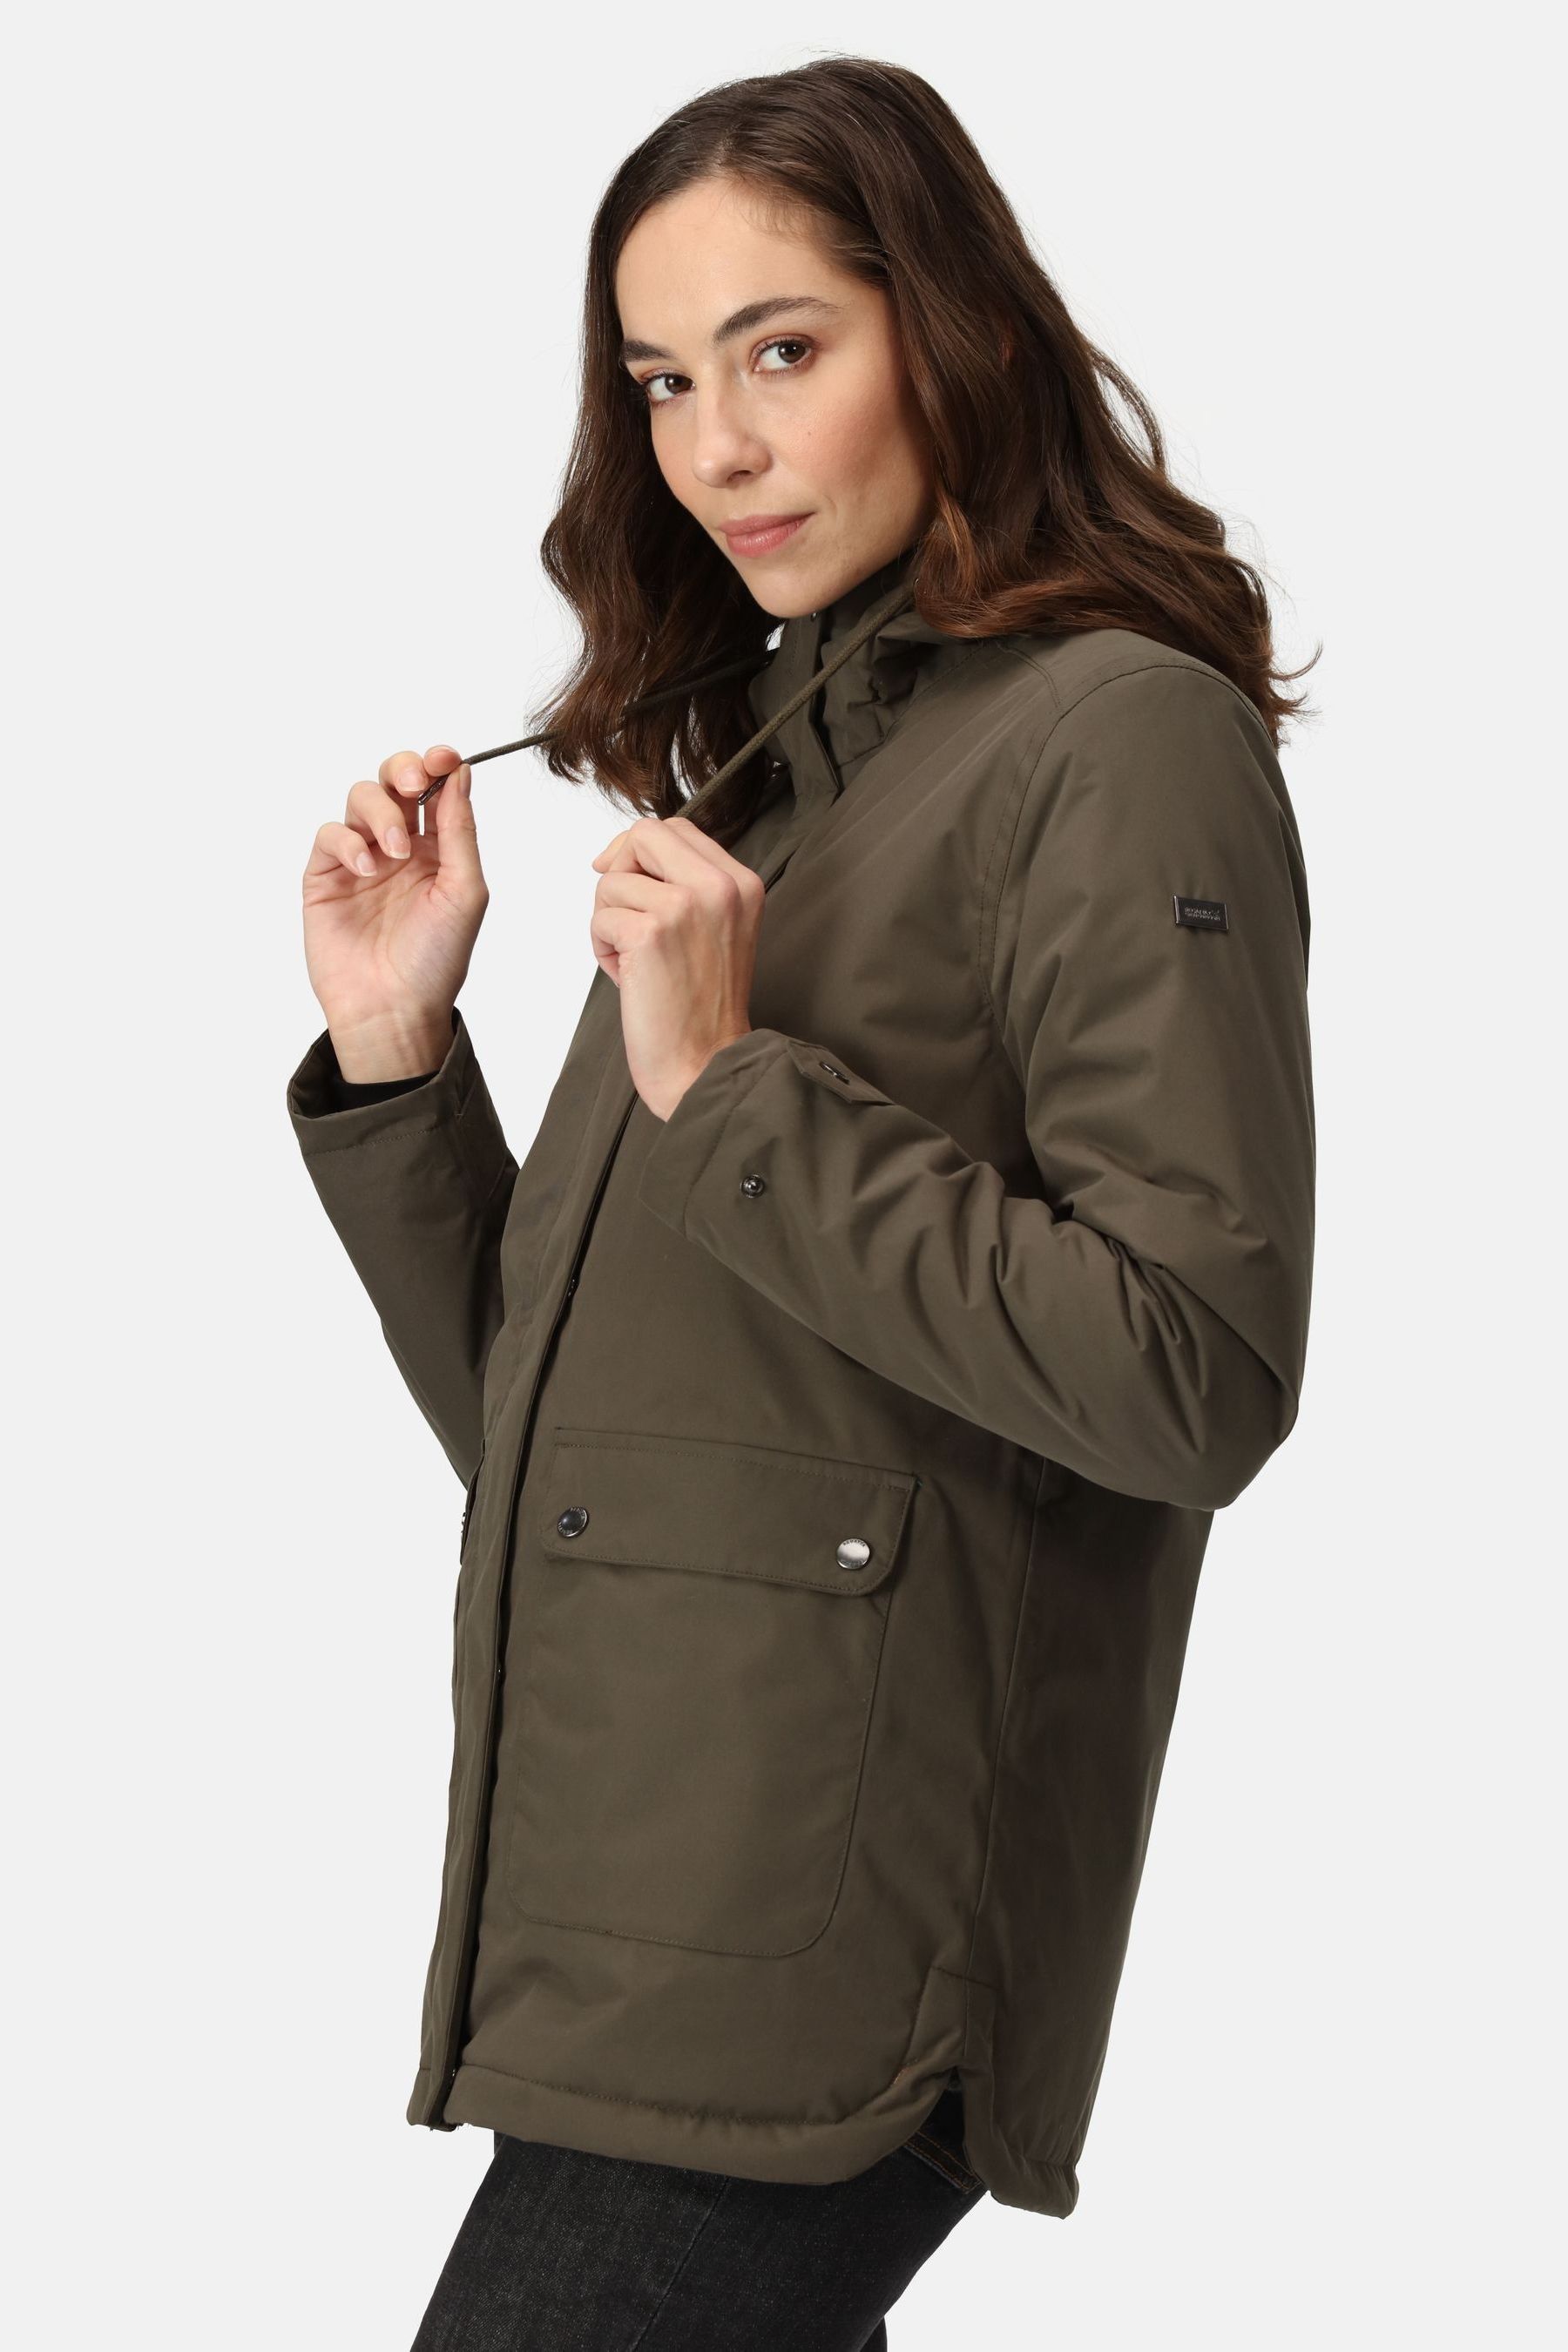 Buy Regatta Broadia Waterproof Thermal Insulated Jacket from the Next ...